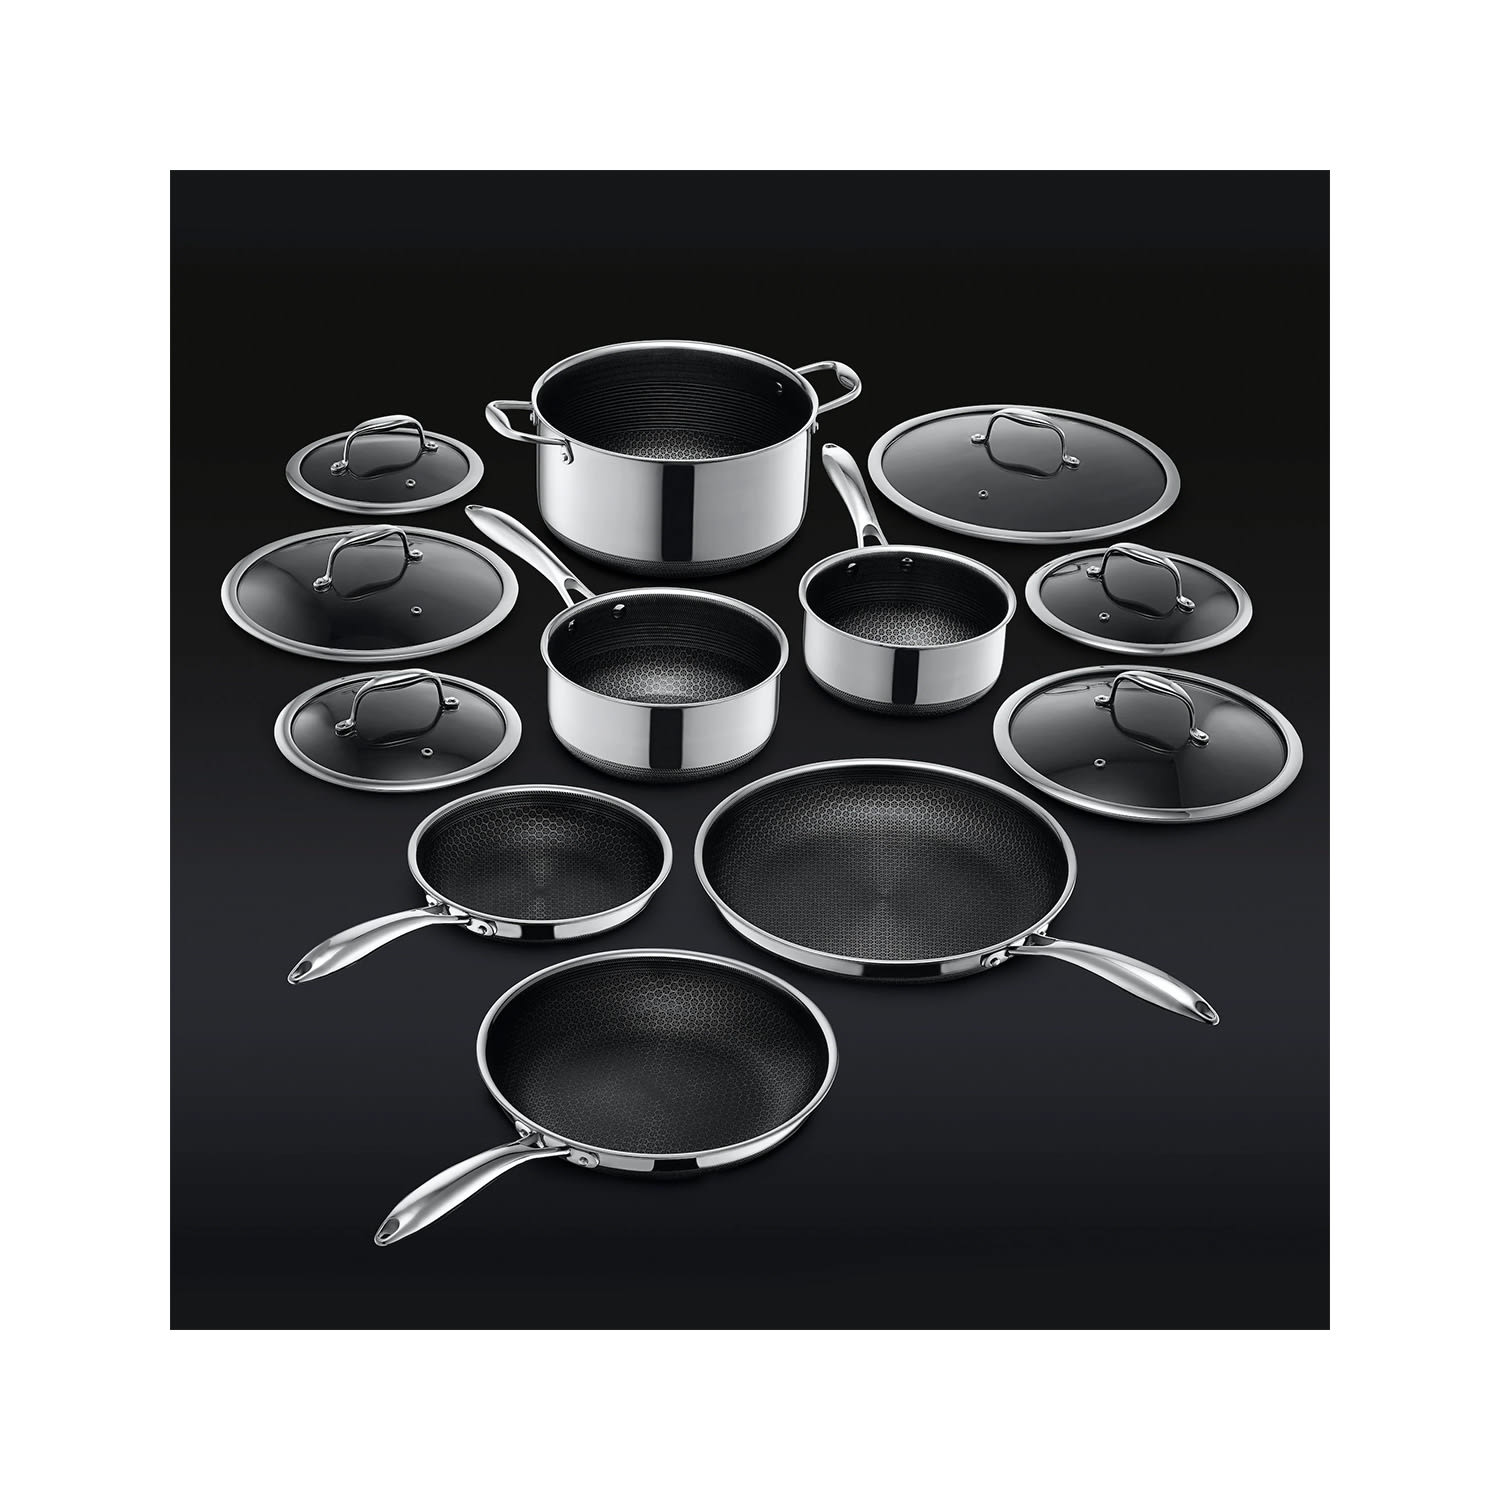 HexClad Review: Cookware & Pans Real-World Tests